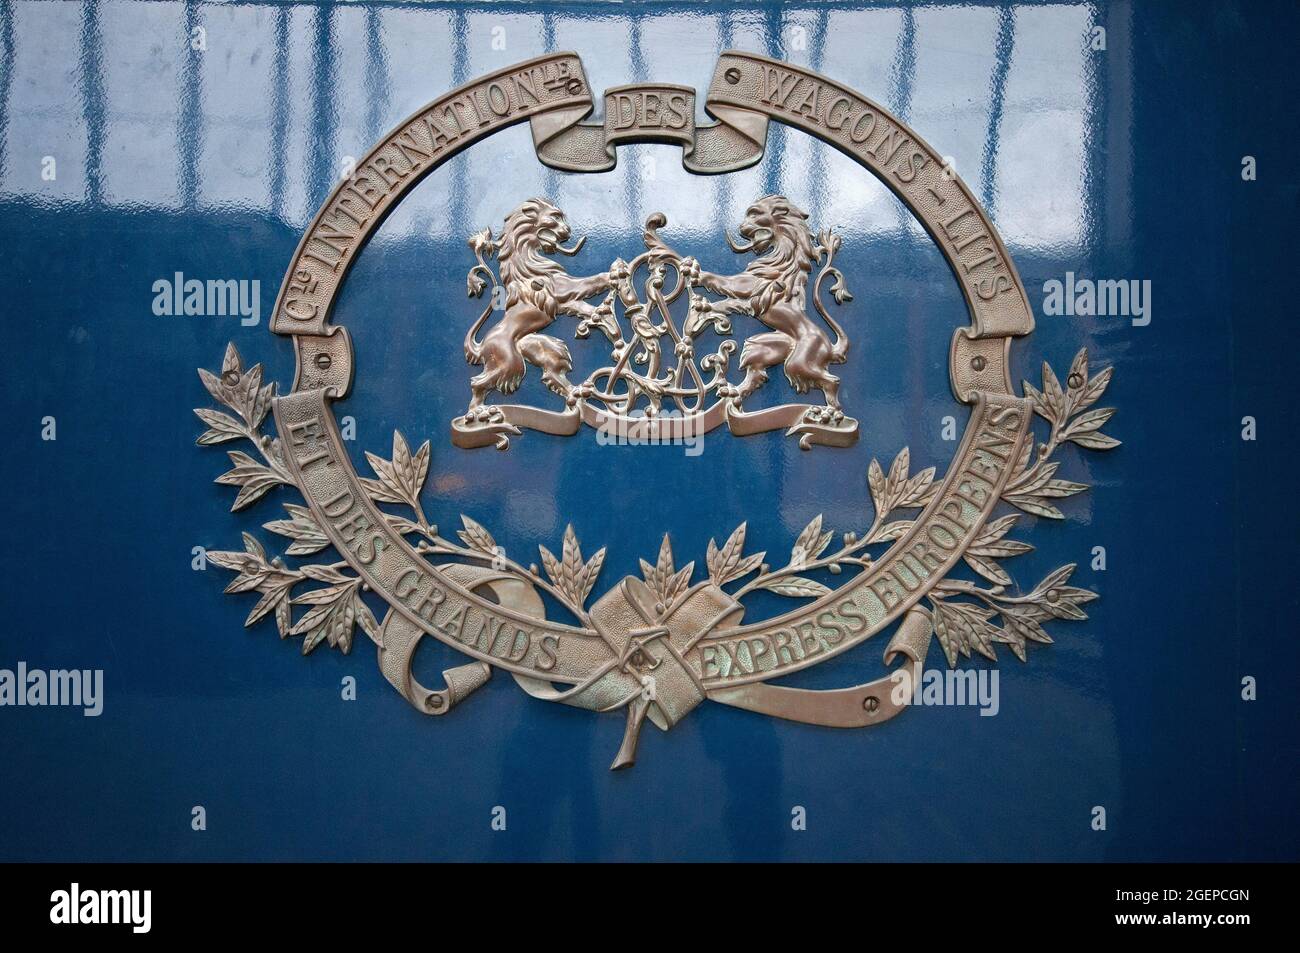 Emblem on the train of the Compagnie Internationale des Wagons-Lits (1943),  Spoorwegmuseum, Utrecht, Netherlands Stock Photo - Alamy